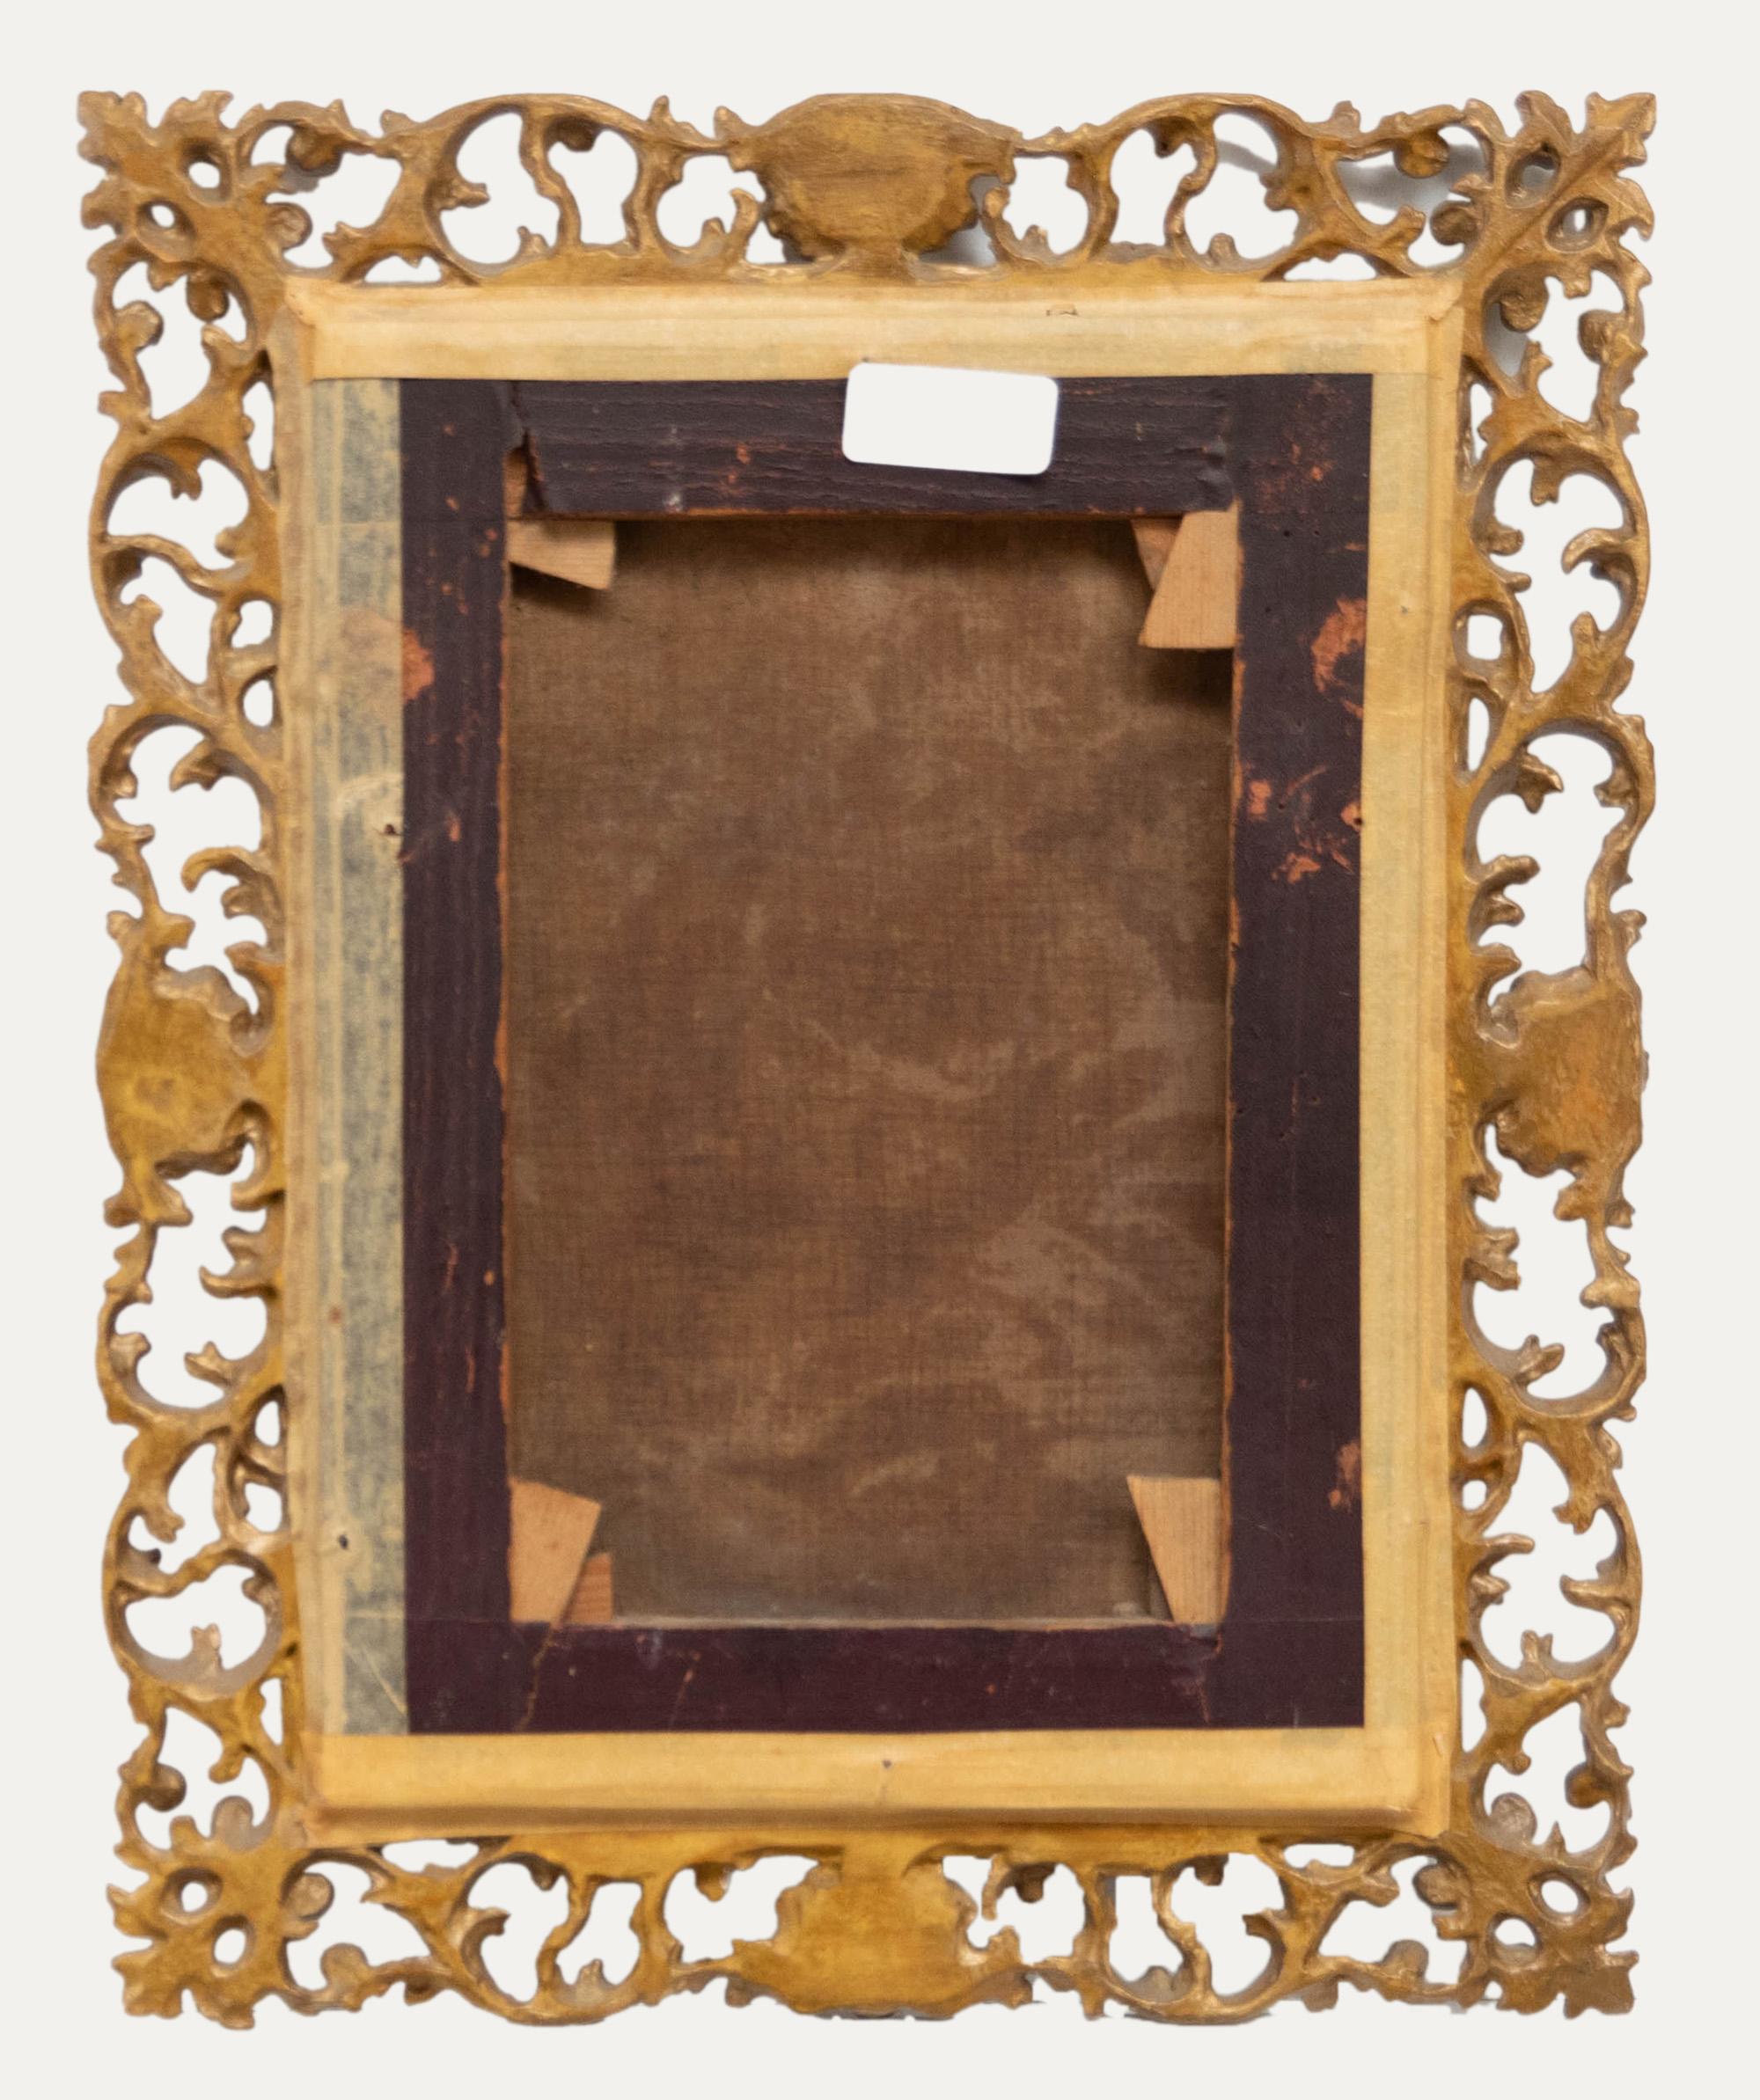 Unsigned. Beautifully presented in a Florentine frame with delicate shell ornamentation. On canvas.